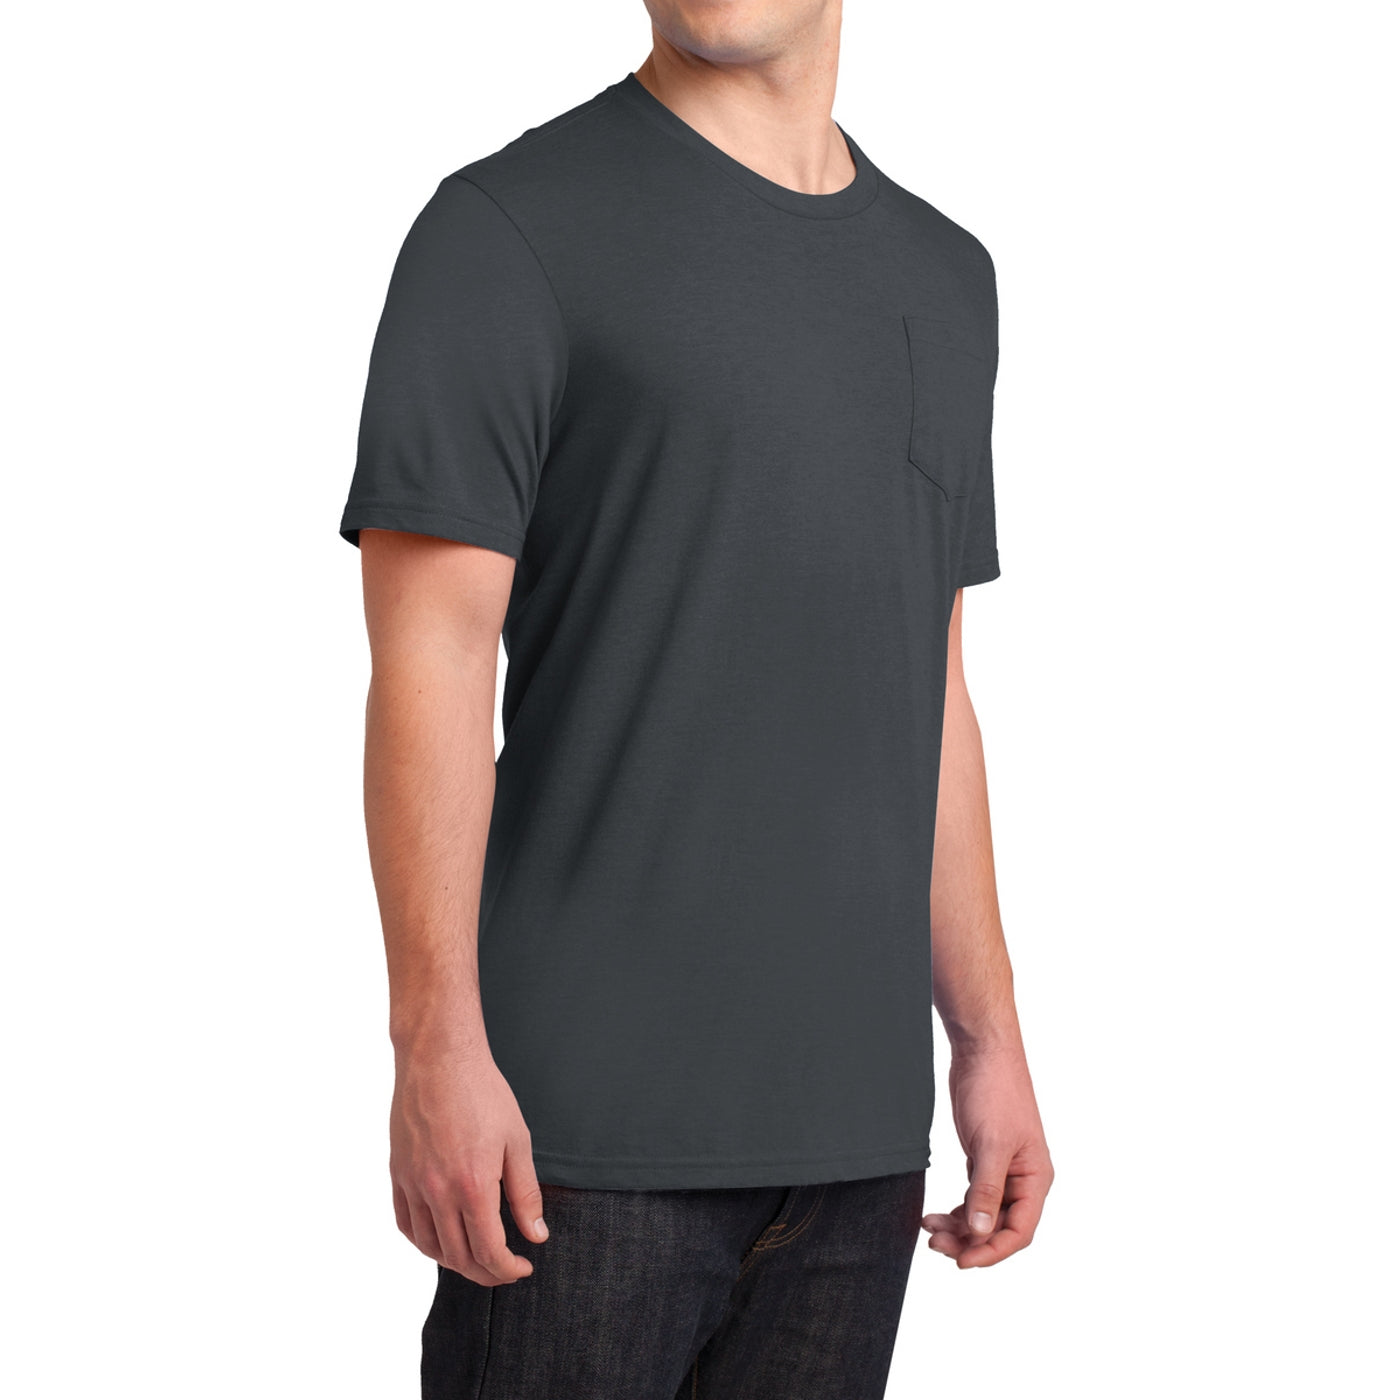 Men's Young Very Important Tee with Pocket - Charcoal